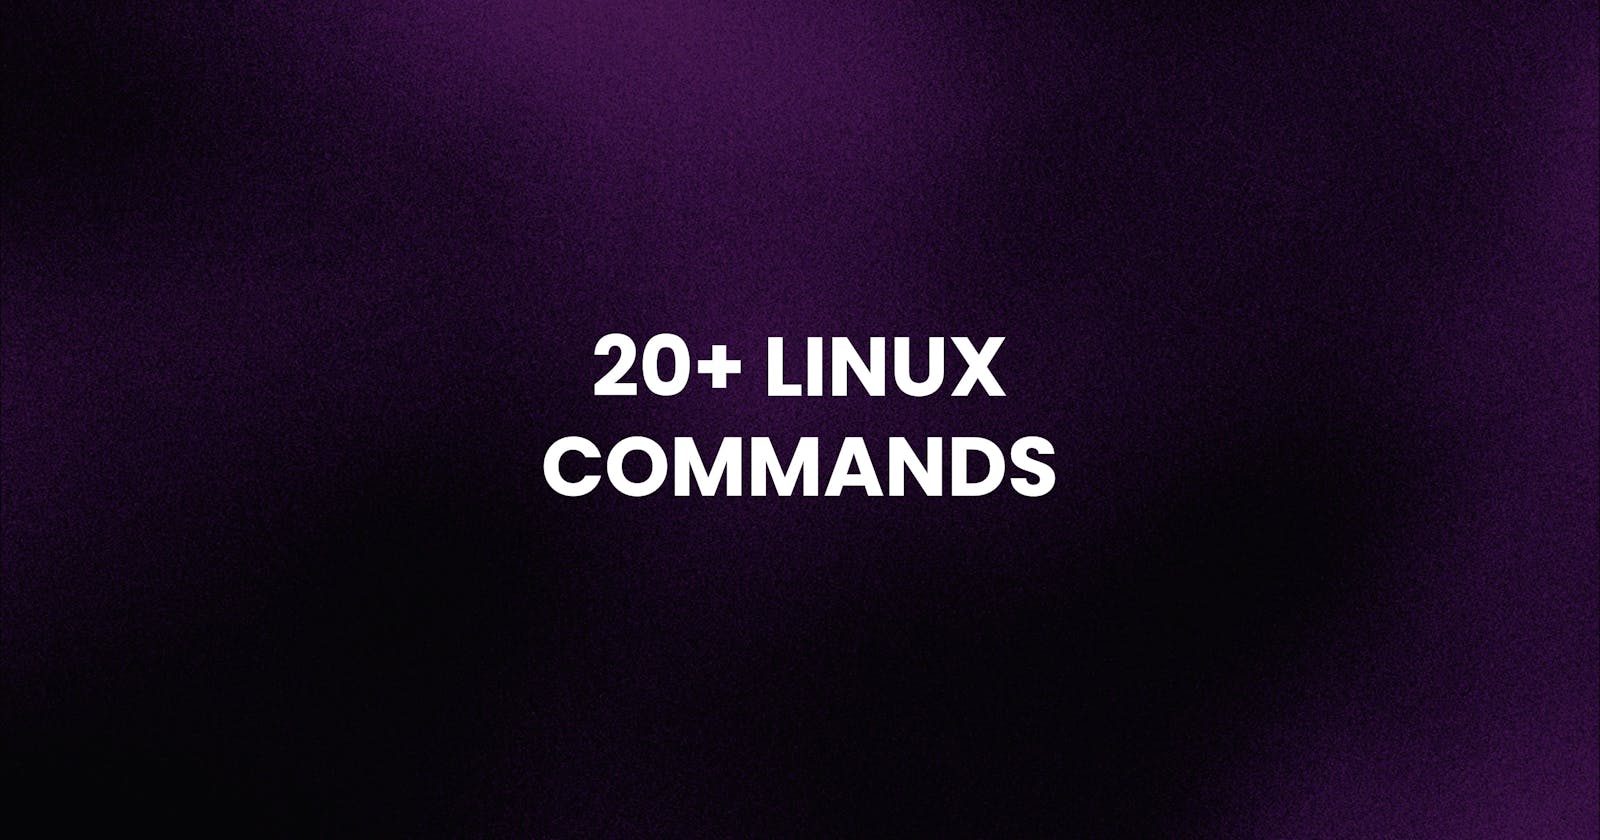 Top 20+1 Linux Commands for Beginners